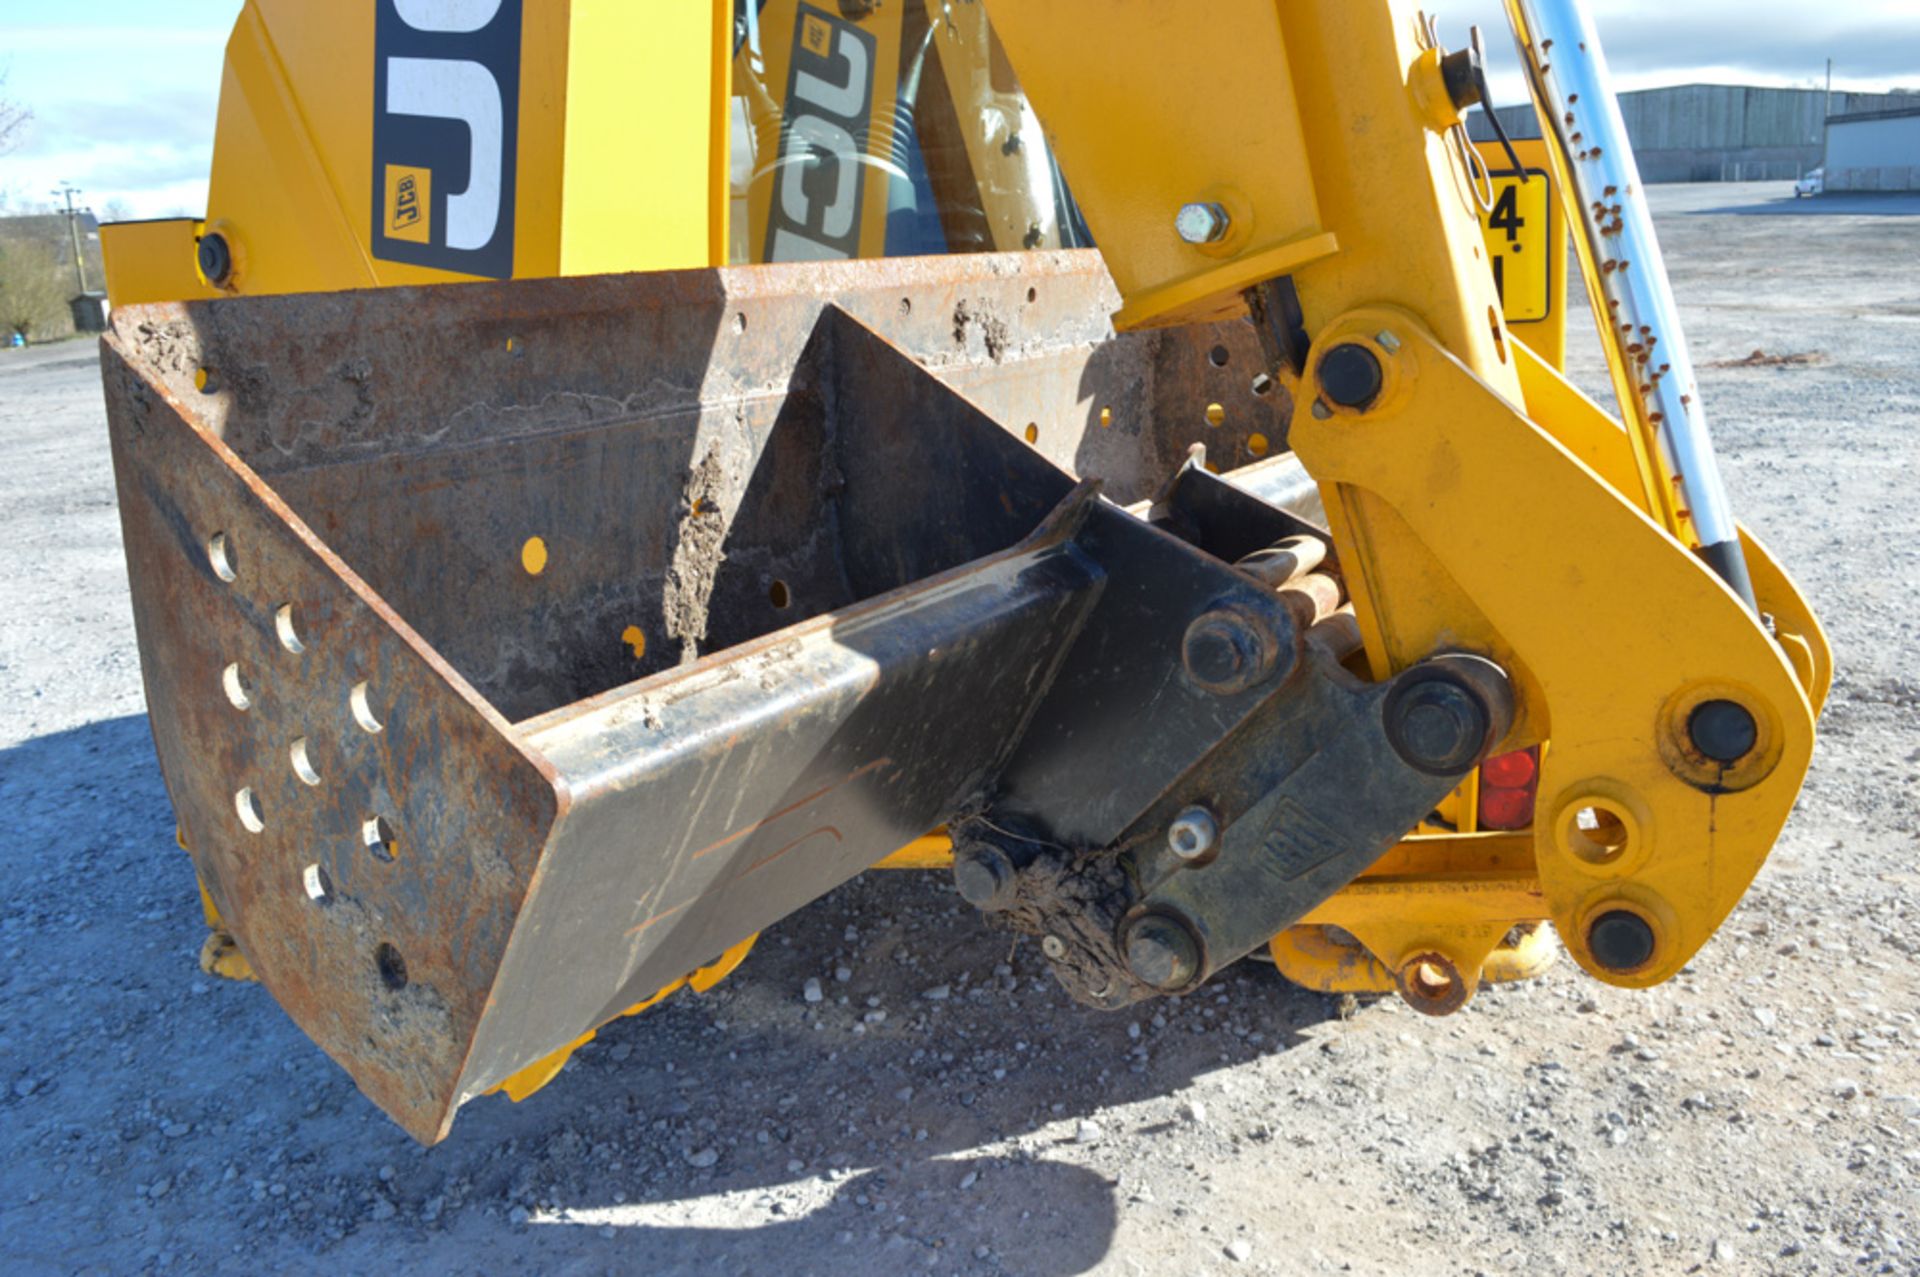 JCB 4CX Contractor backhoe loader Year: 2014 S/N: 2269627 Recorded Hours: 78 - Image 12 of 17